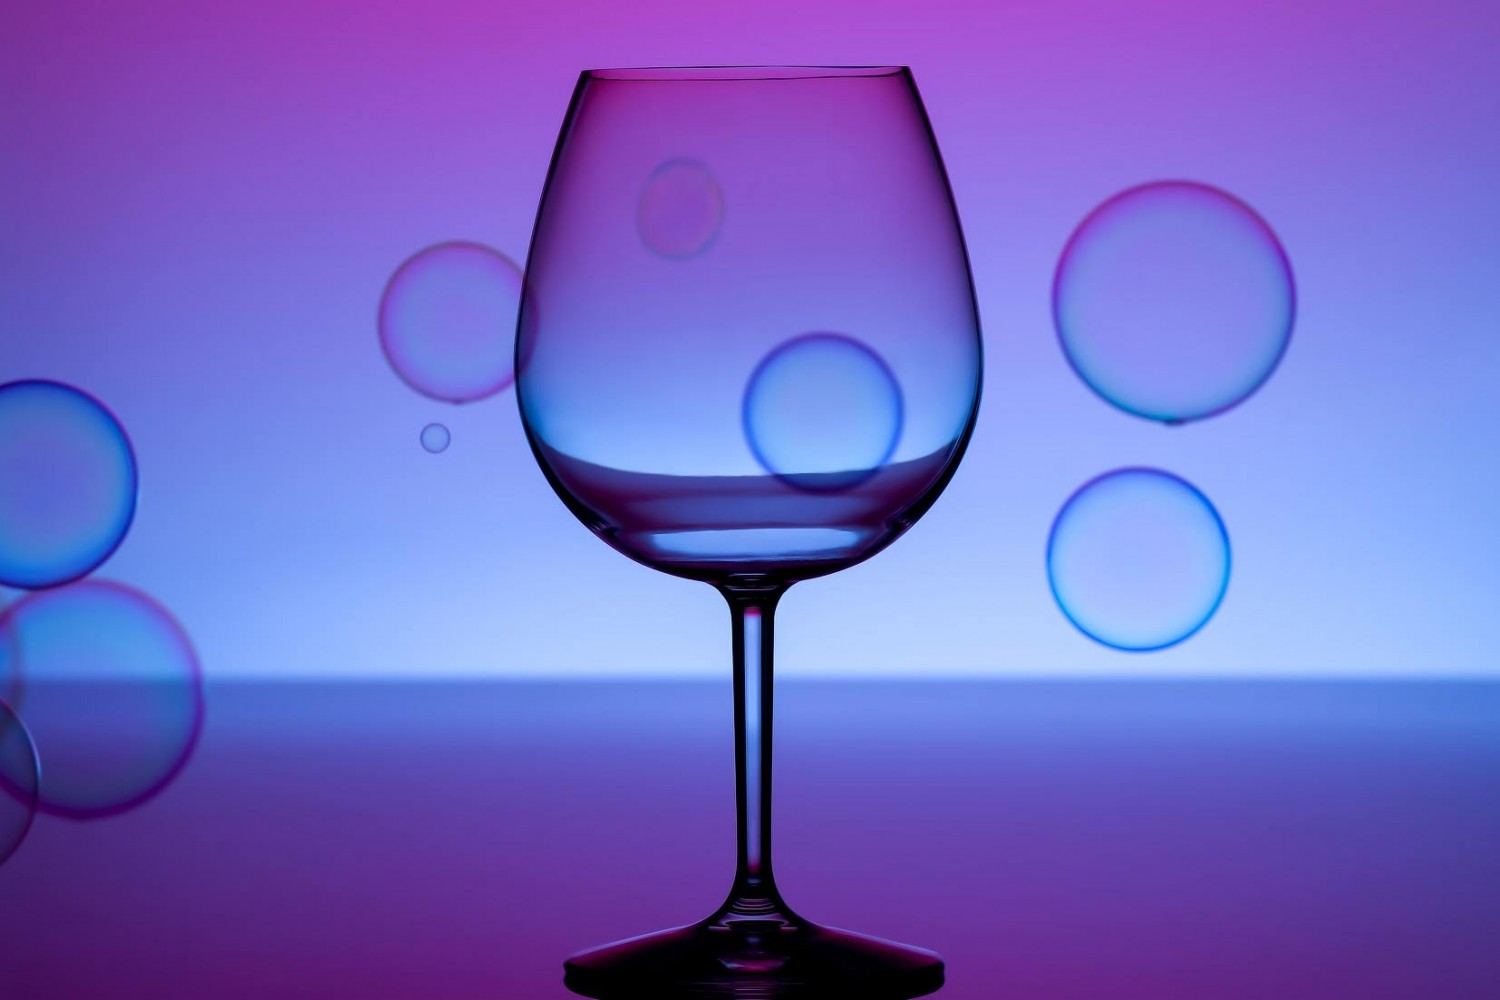 Colored Gels & Bubbles: A Fun Photo Idea to Try This Week